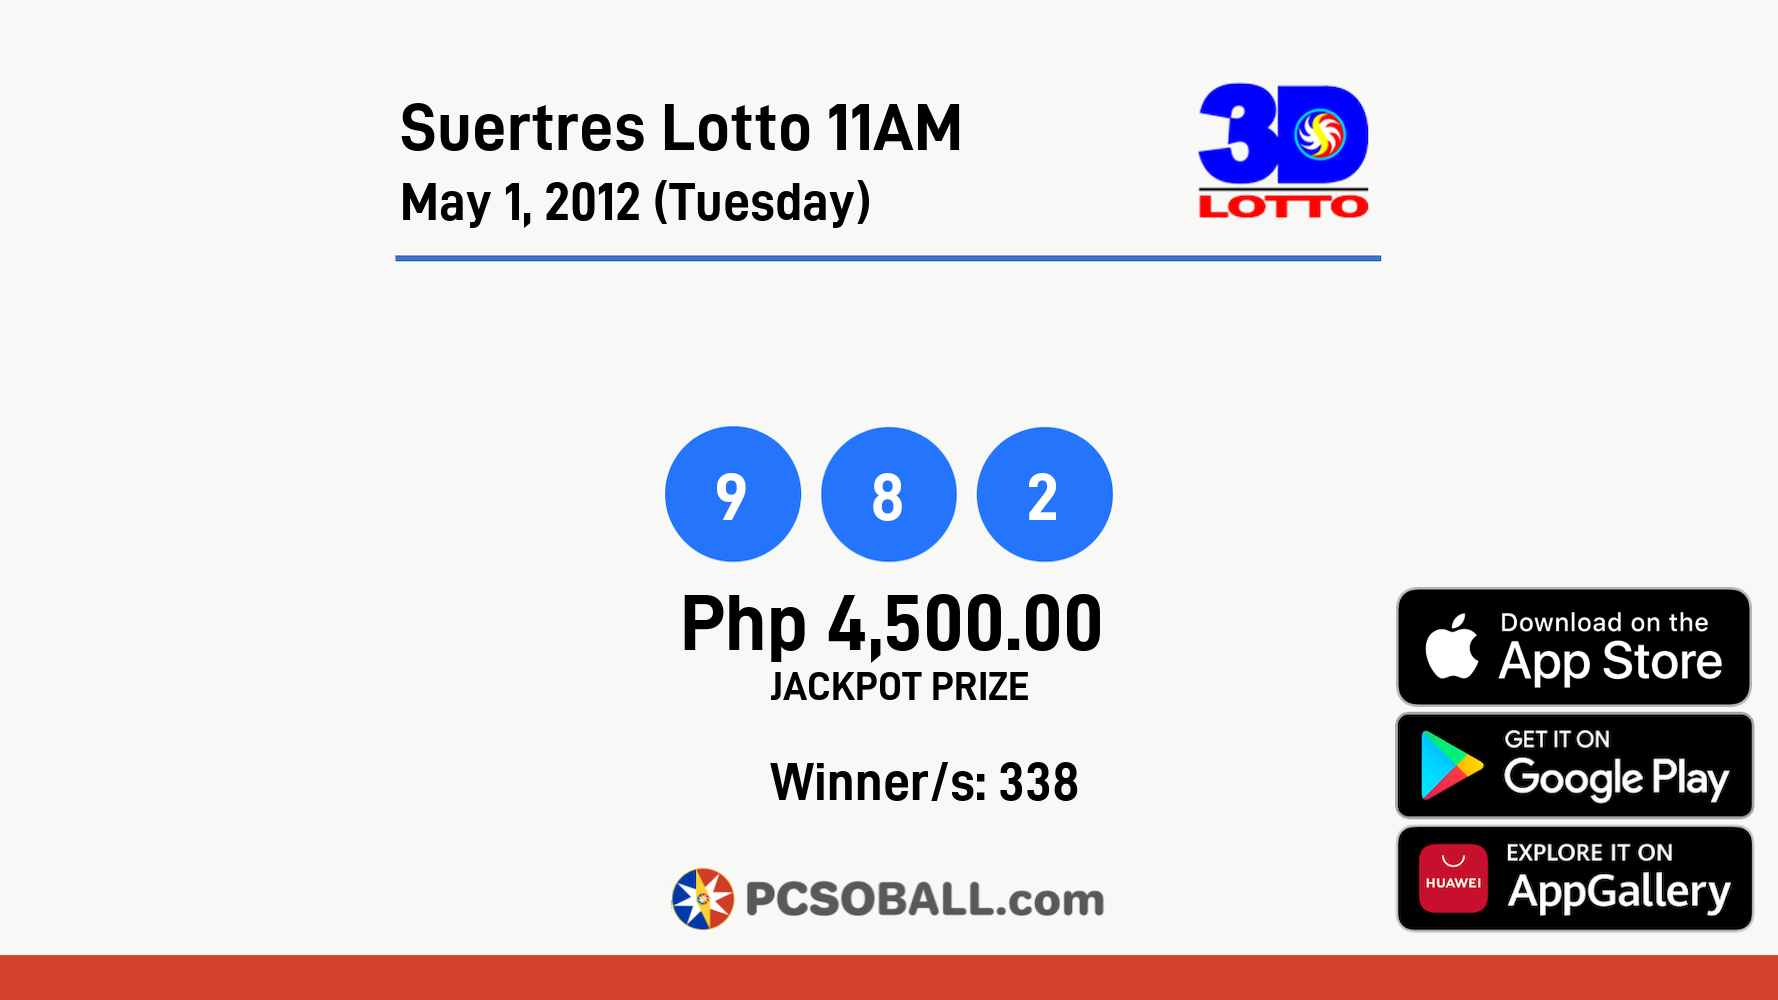 Suertres Lotto 11AM May 1, 2012 (Tuesday) Result